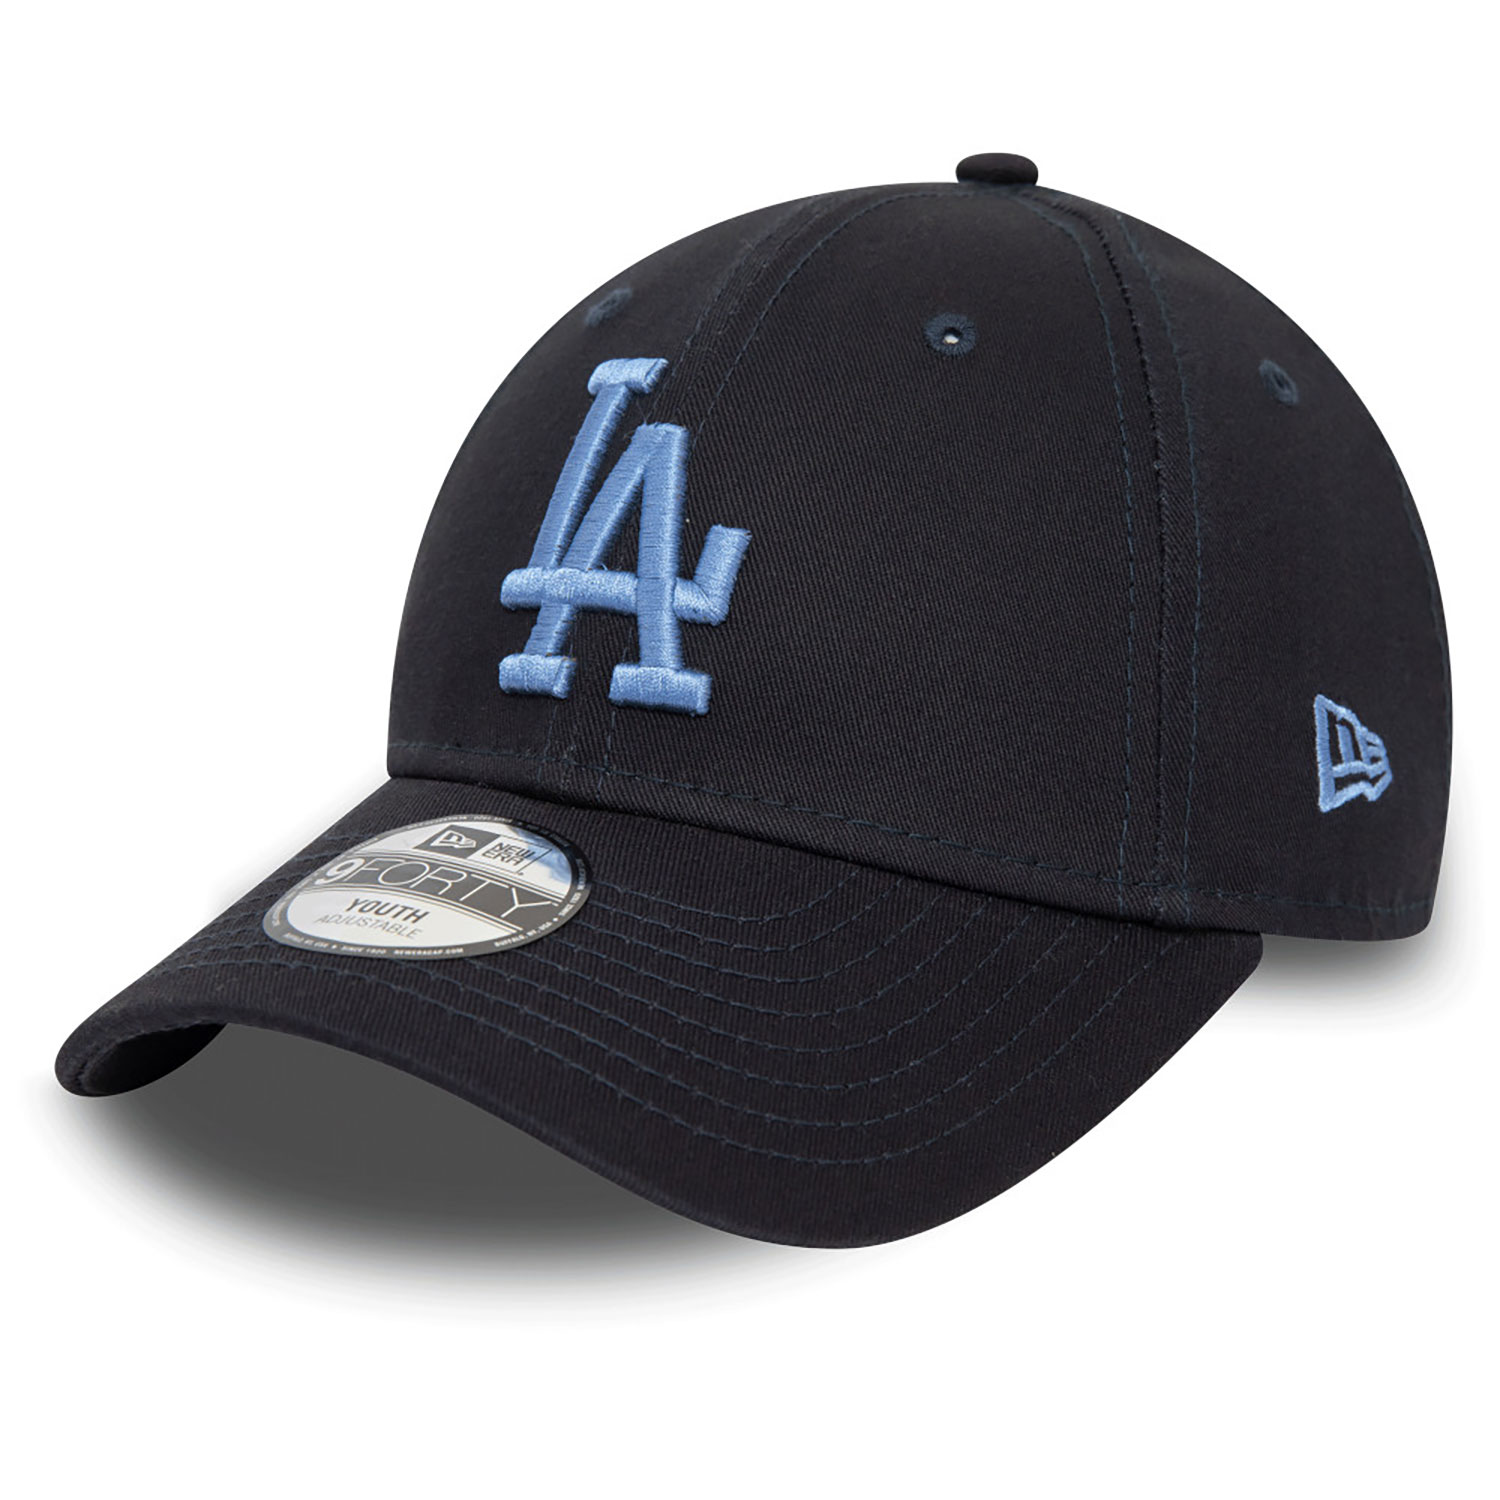 LA Dodgers Youth League Essential Navy 9FORTY Adjustable Cap